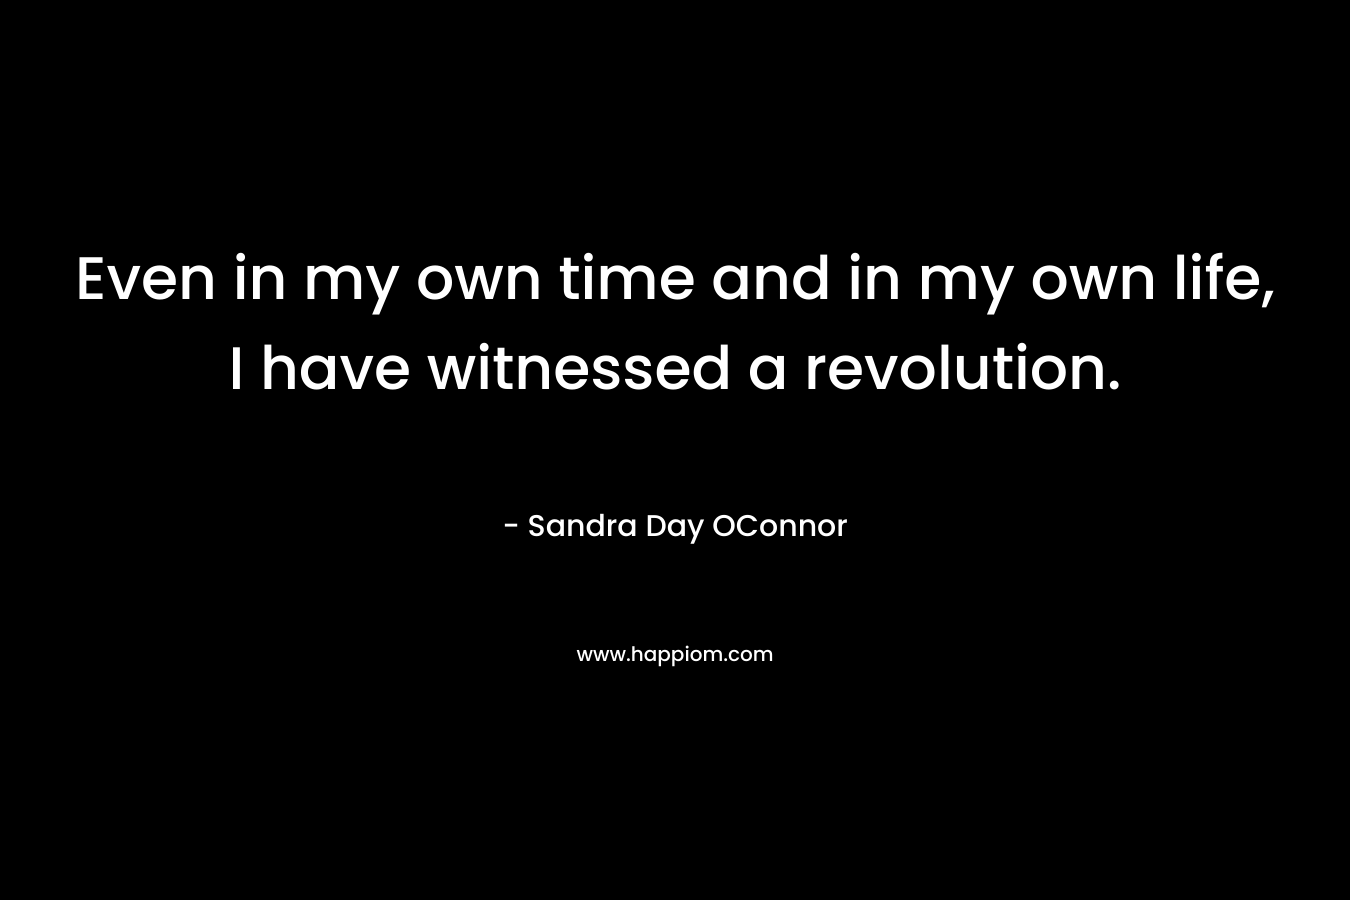 Even in my own time and in my own life, I have witnessed a revolution. – Sandra Day OConnor